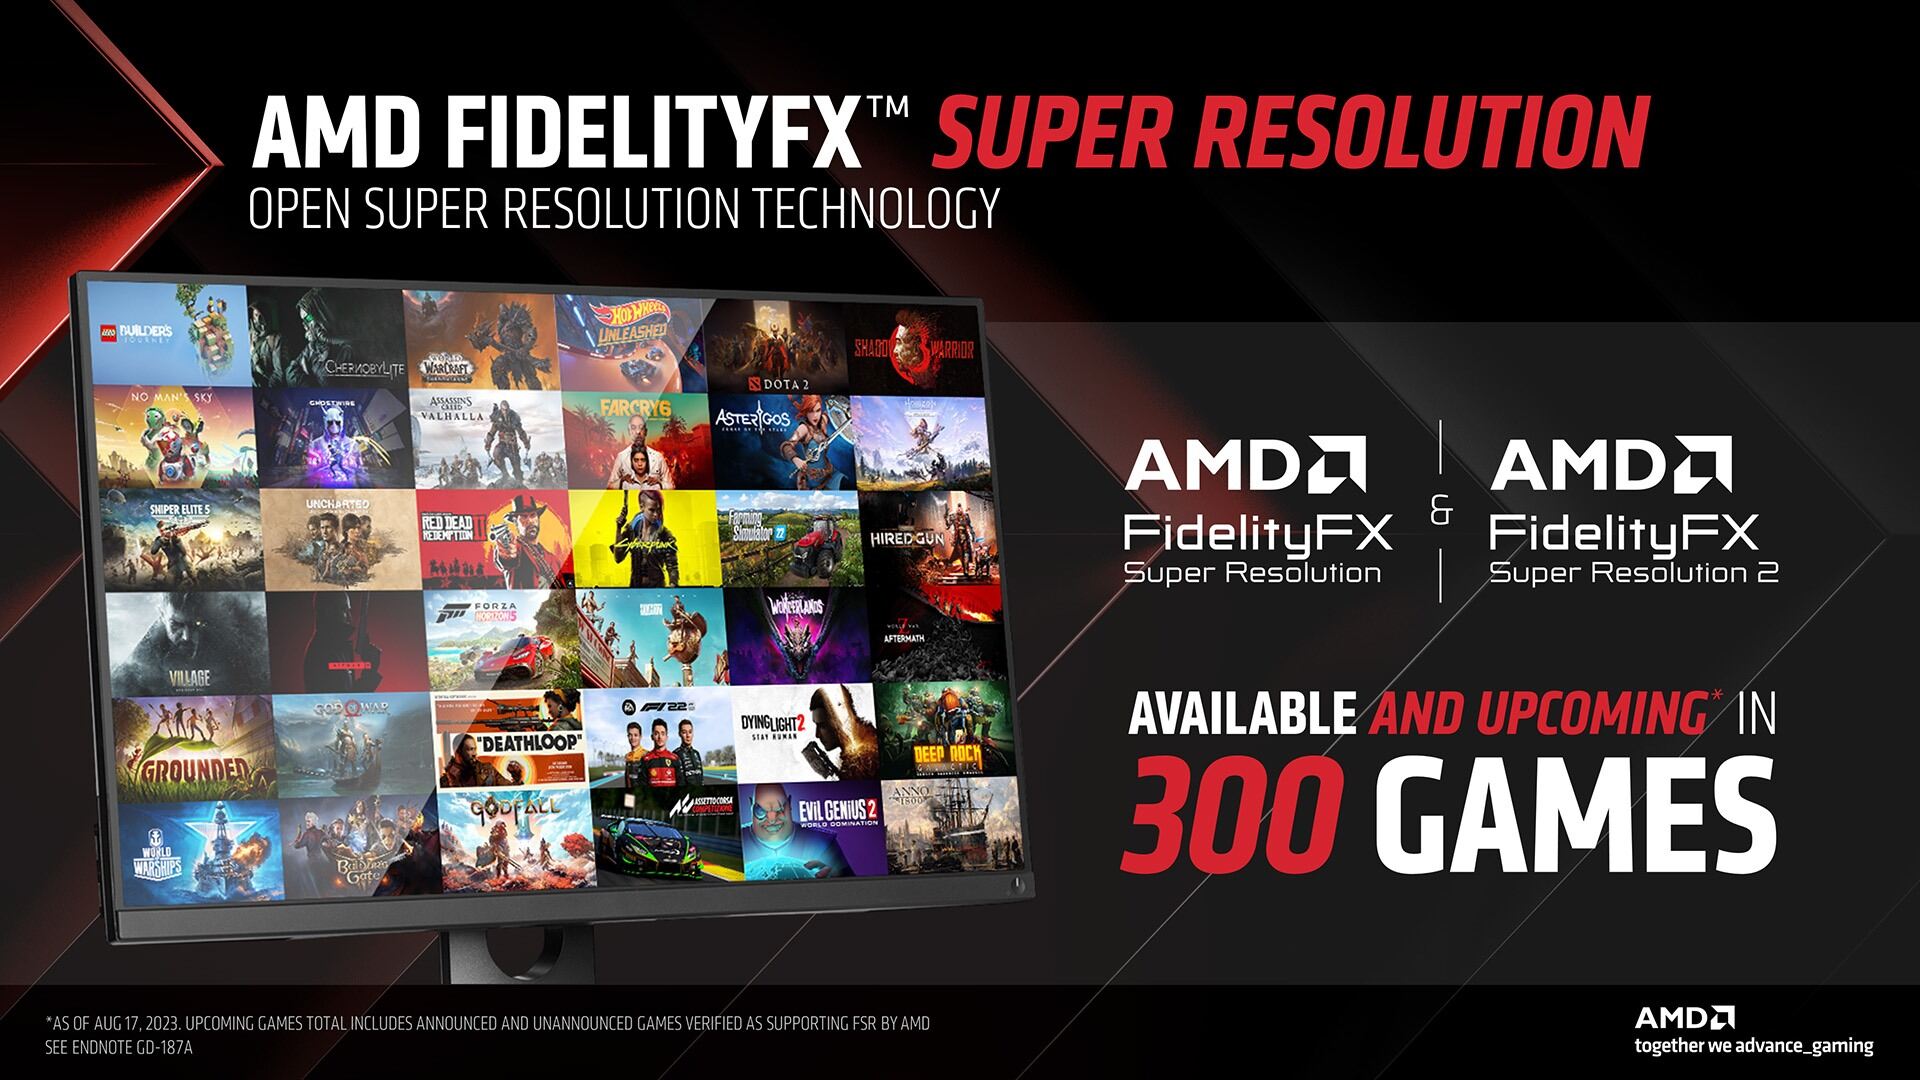 AMD FSR 3 available in over 300 games message, with some game images shown.